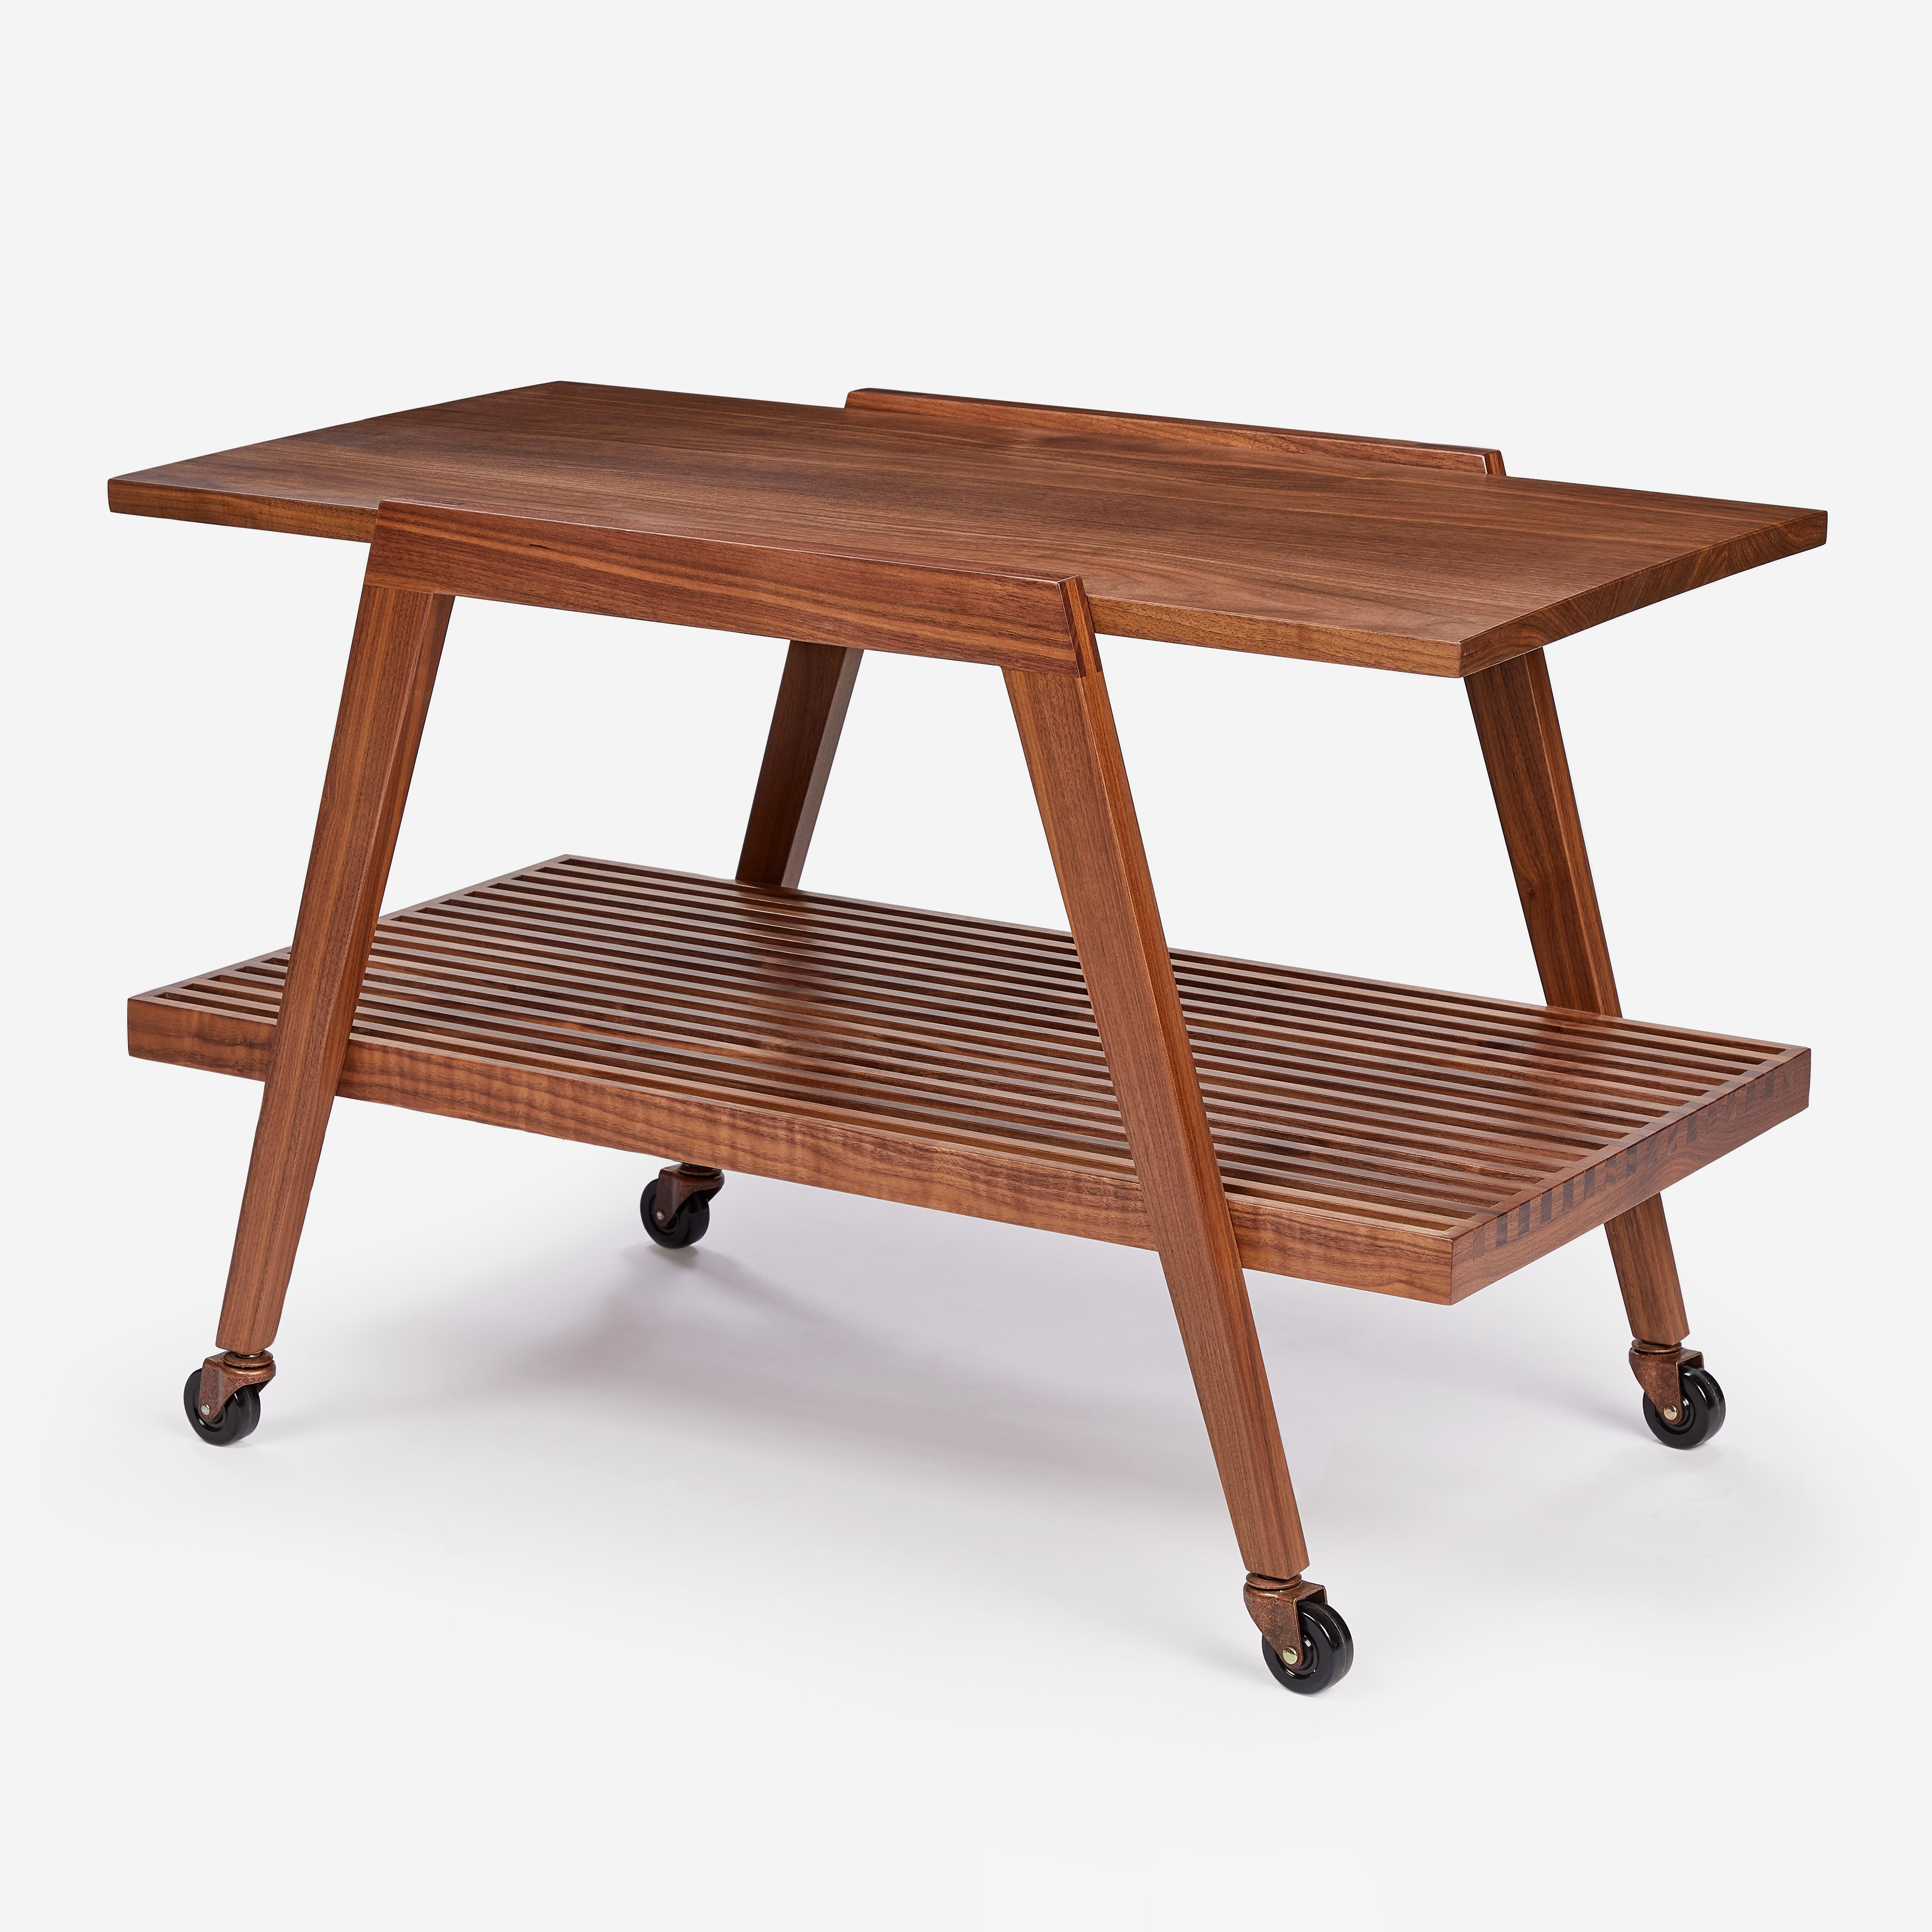 Originally designed by Mel Smilow in 1950 and reintroduced in 2022, the Slatted Tea Cart is a two-level rolling cart built with our signature walnut slats and fine joinery details. The wheels are made of hard rubber and secured with a brass caster.